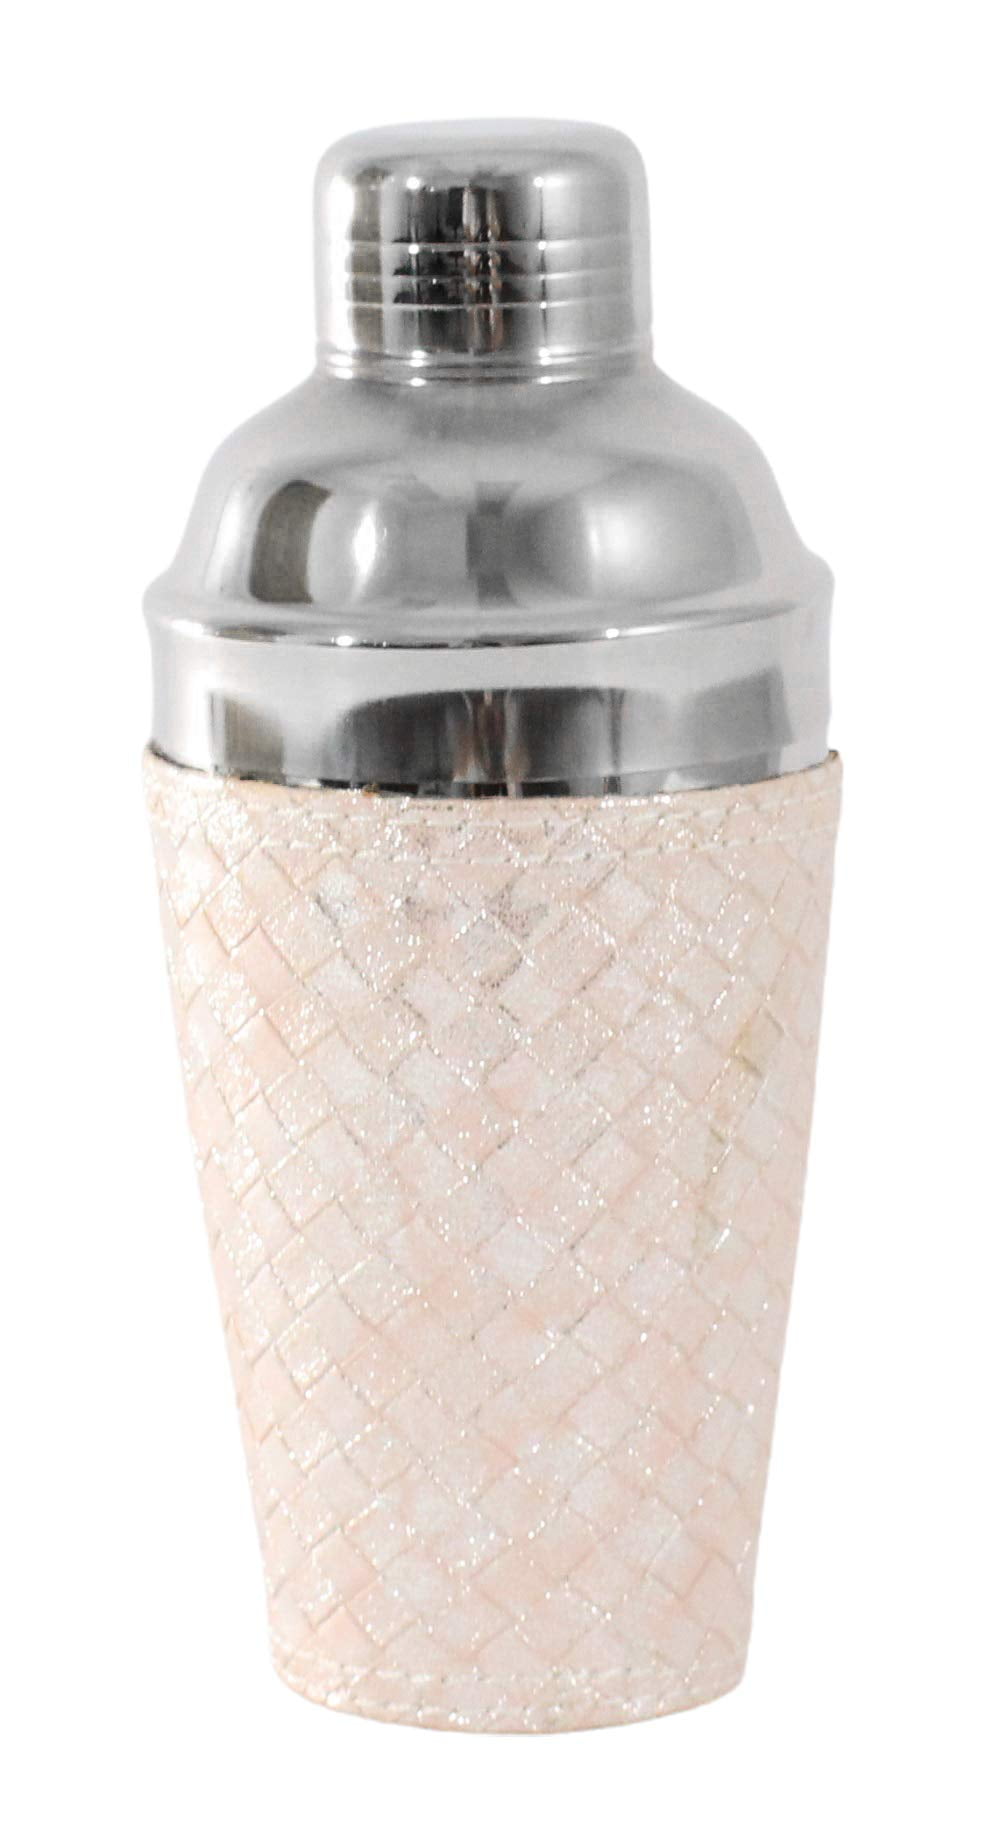 6 Pro-Approved Cocktail Shakers - Shake Things Up